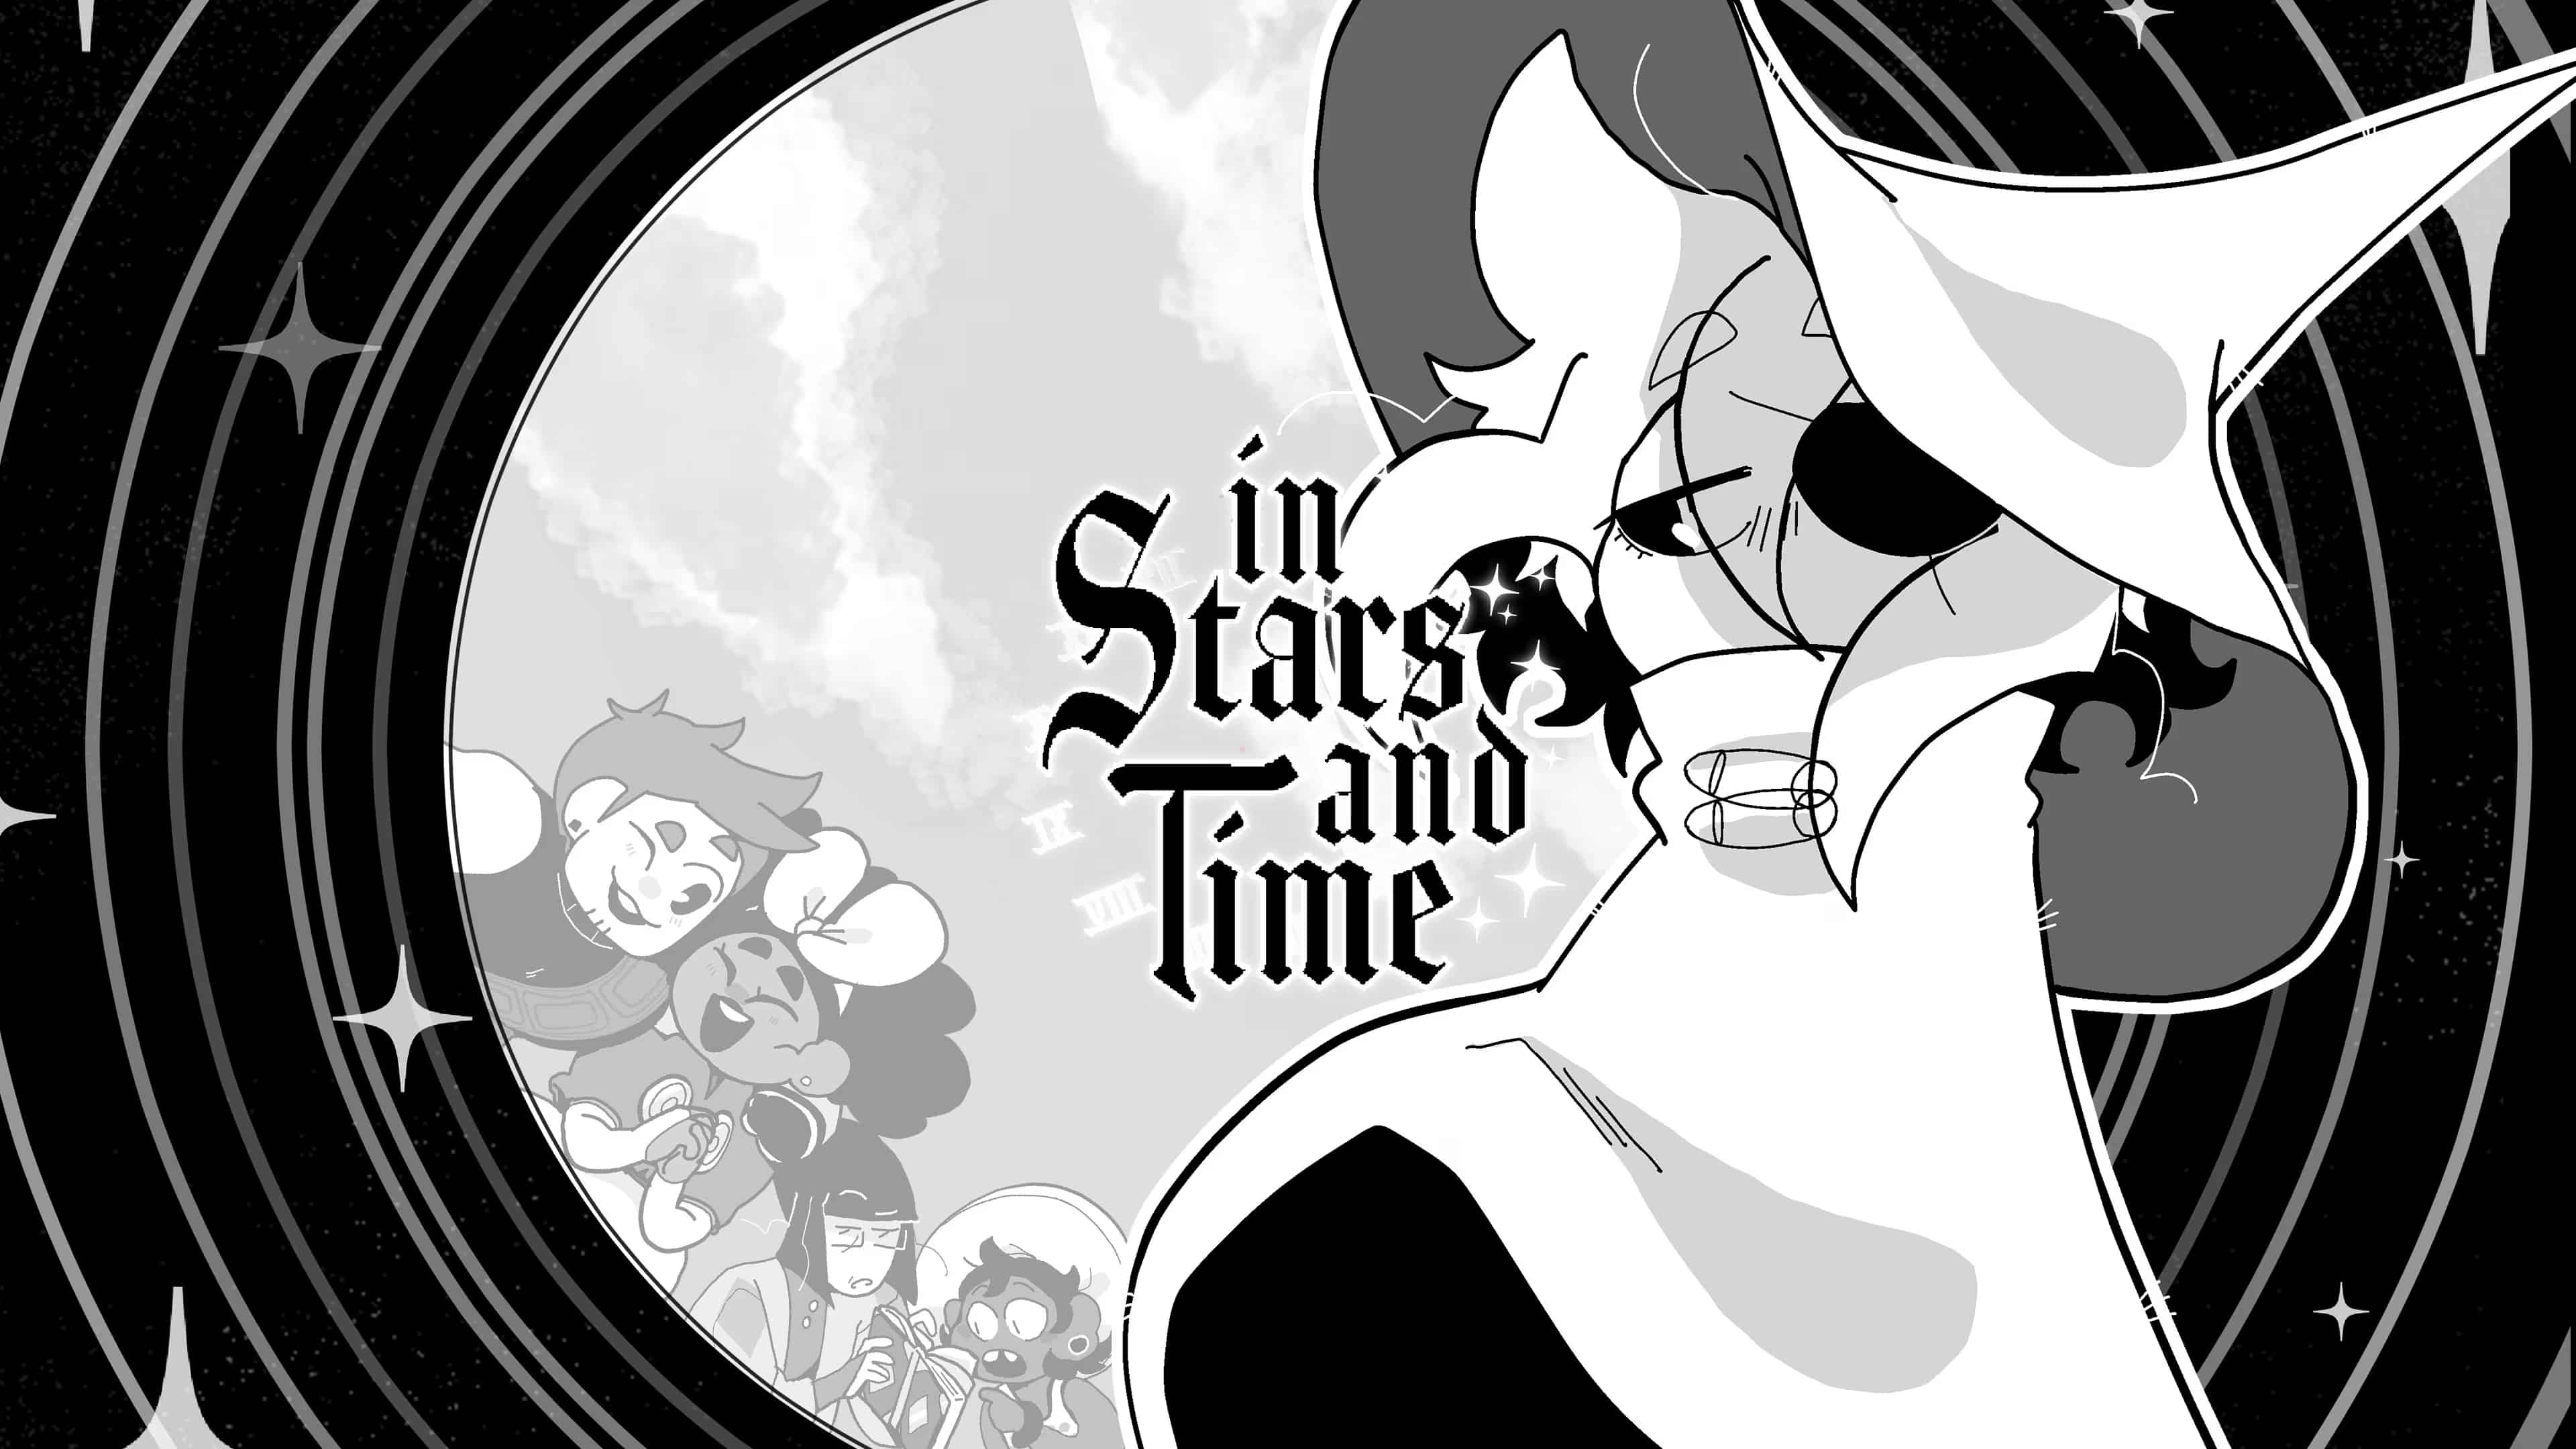 In stars and time 4